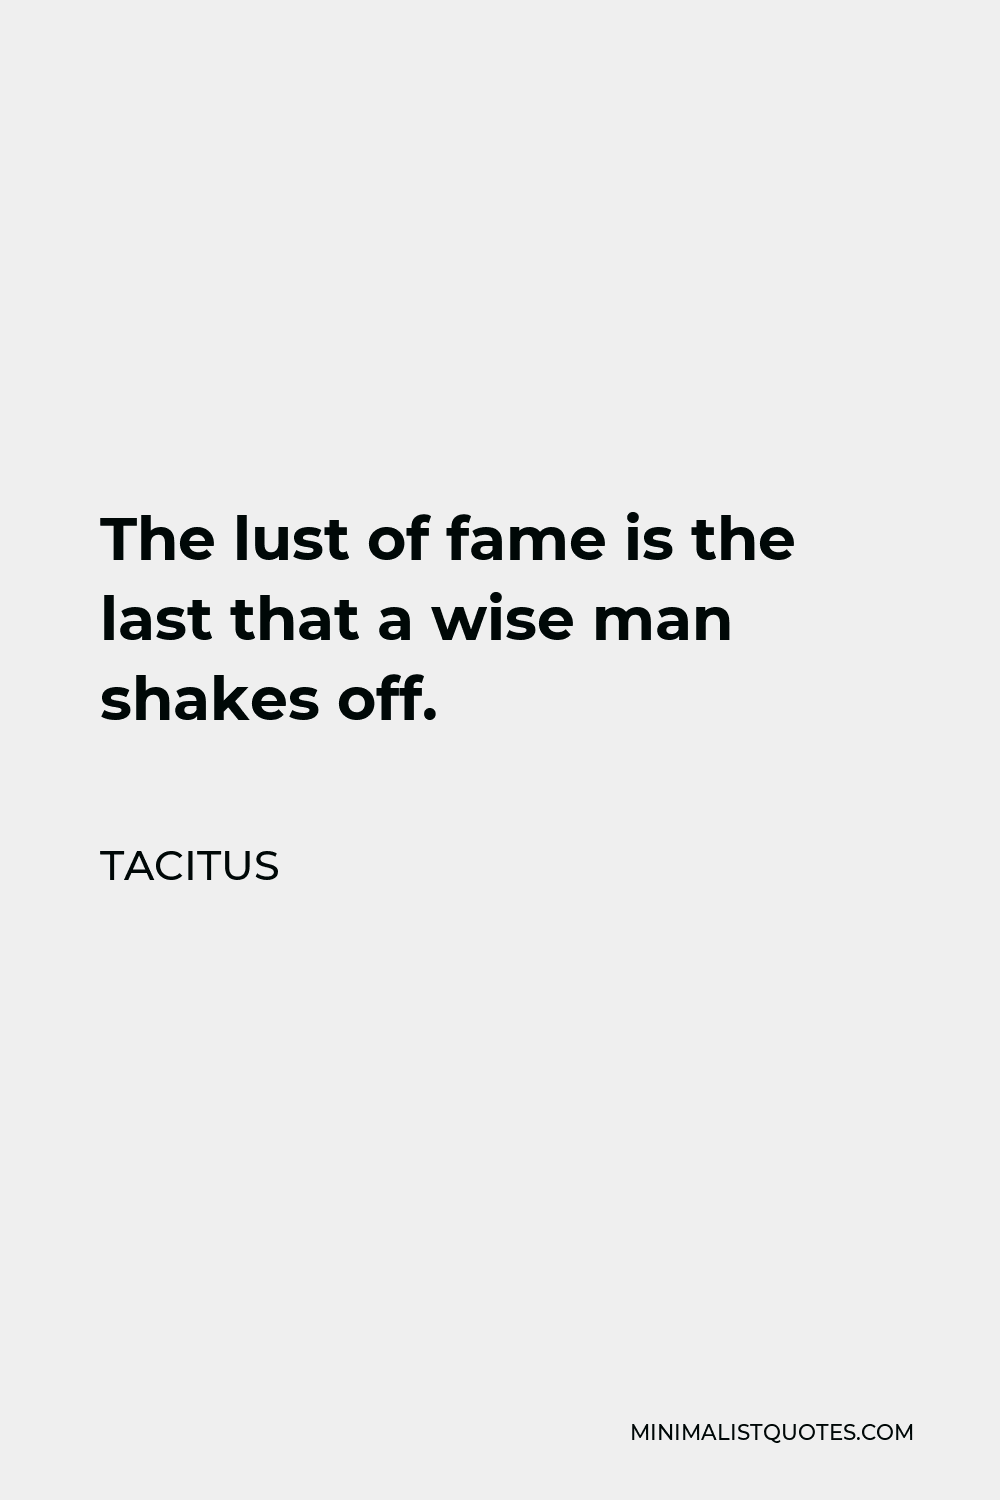 Tacitus Quote - The lust of fame is the last that a wise man shakes off.